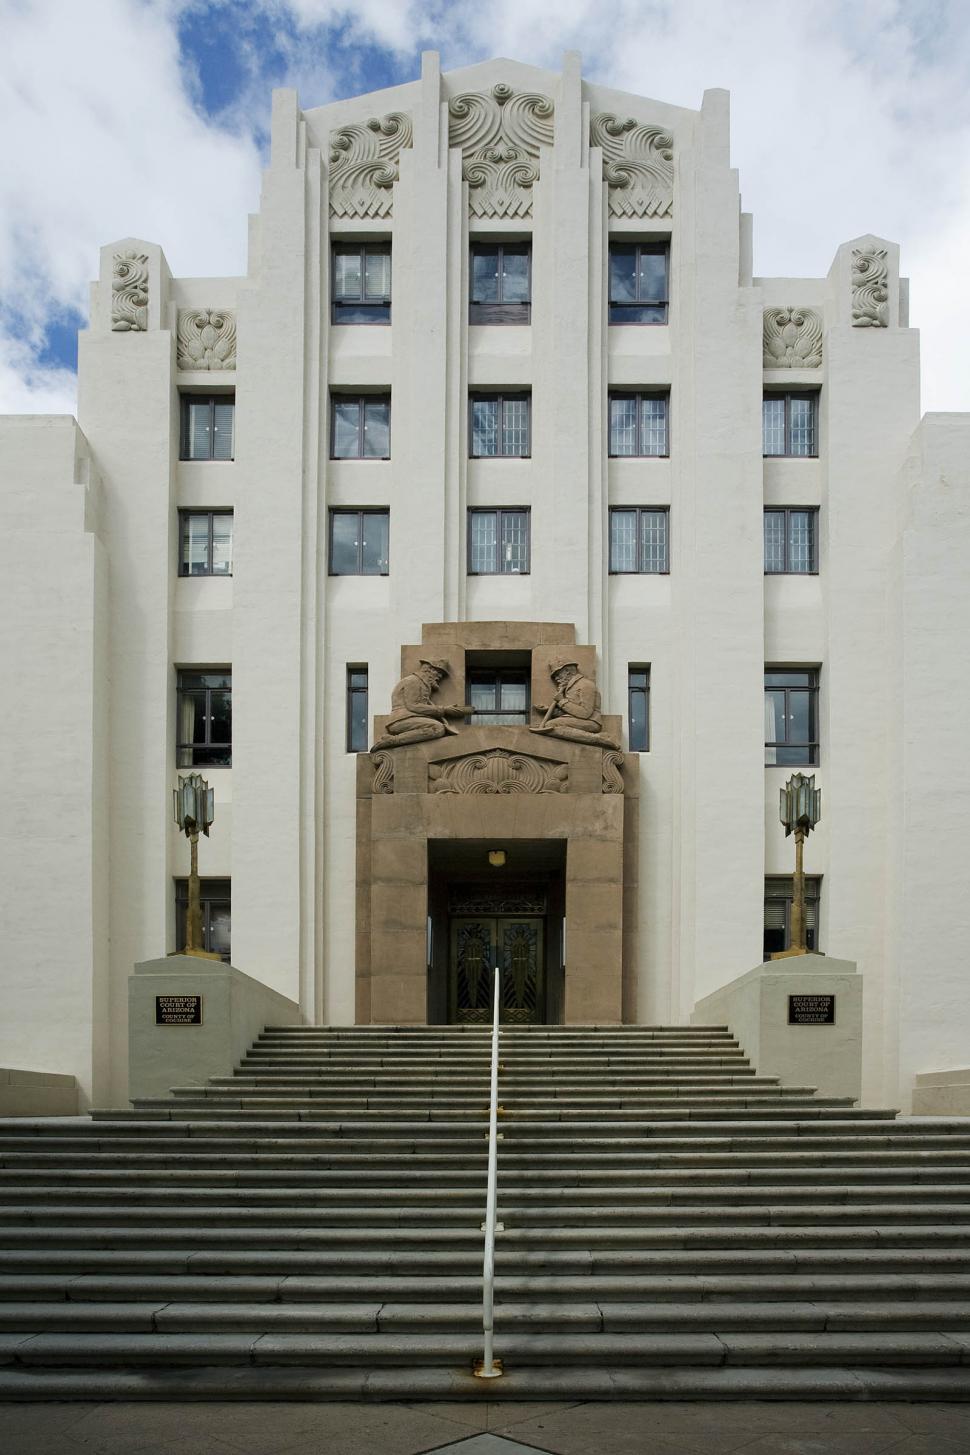 Free Image of Art deco building with entry stairway 